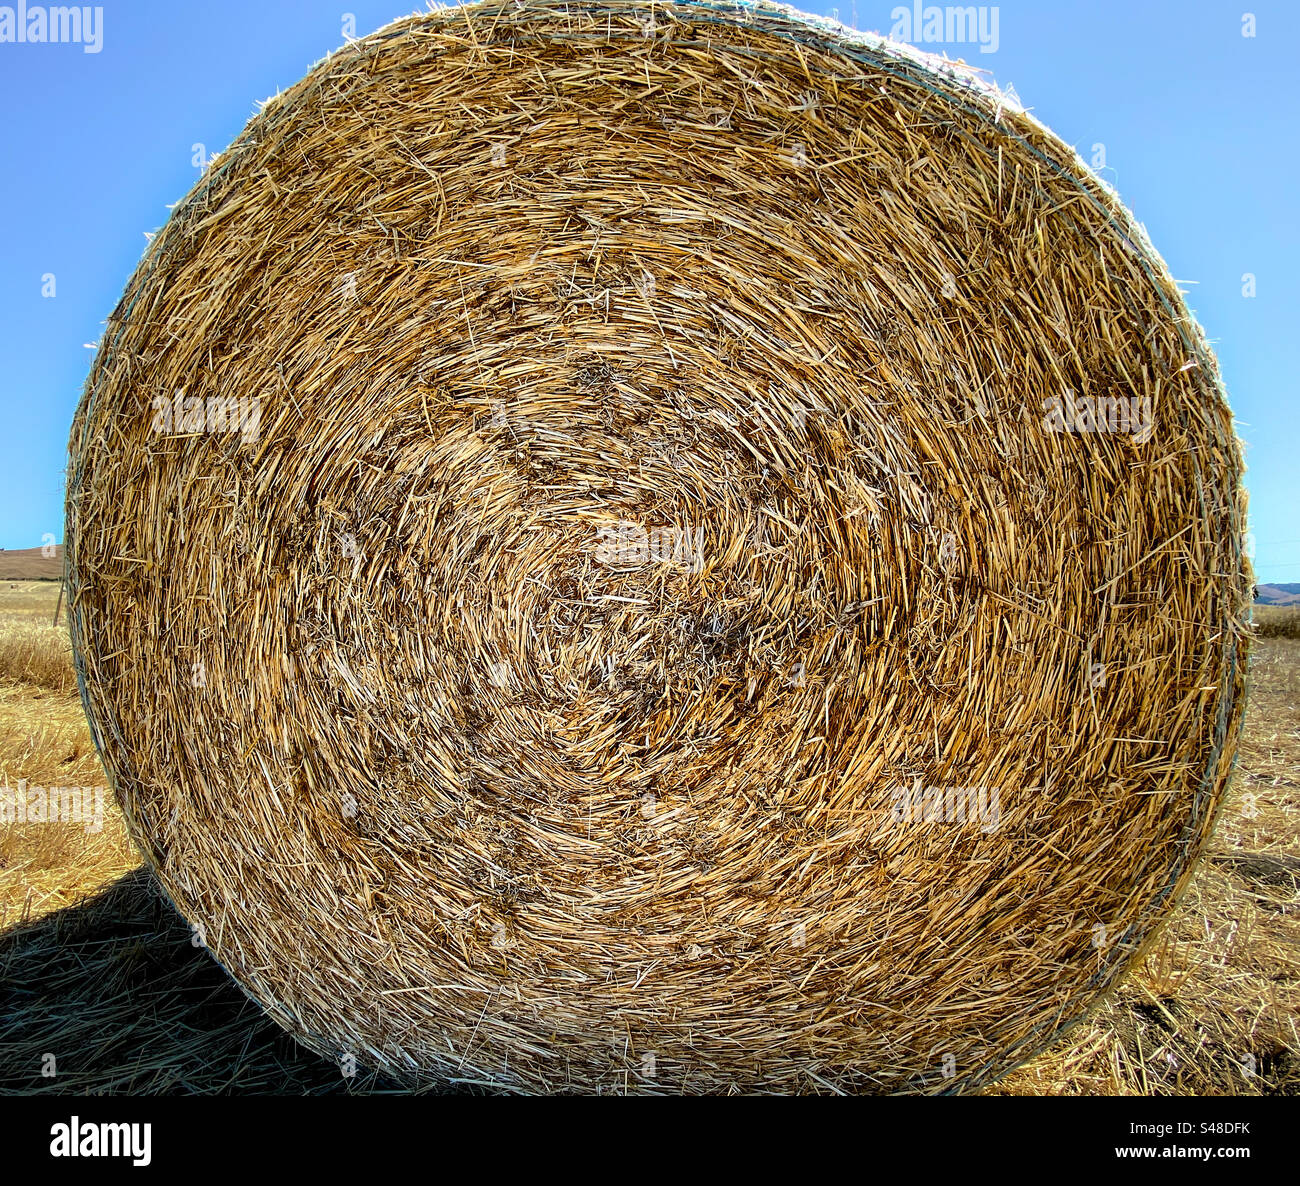 Large bale of hay in the Tuscan countryside Stock Photo